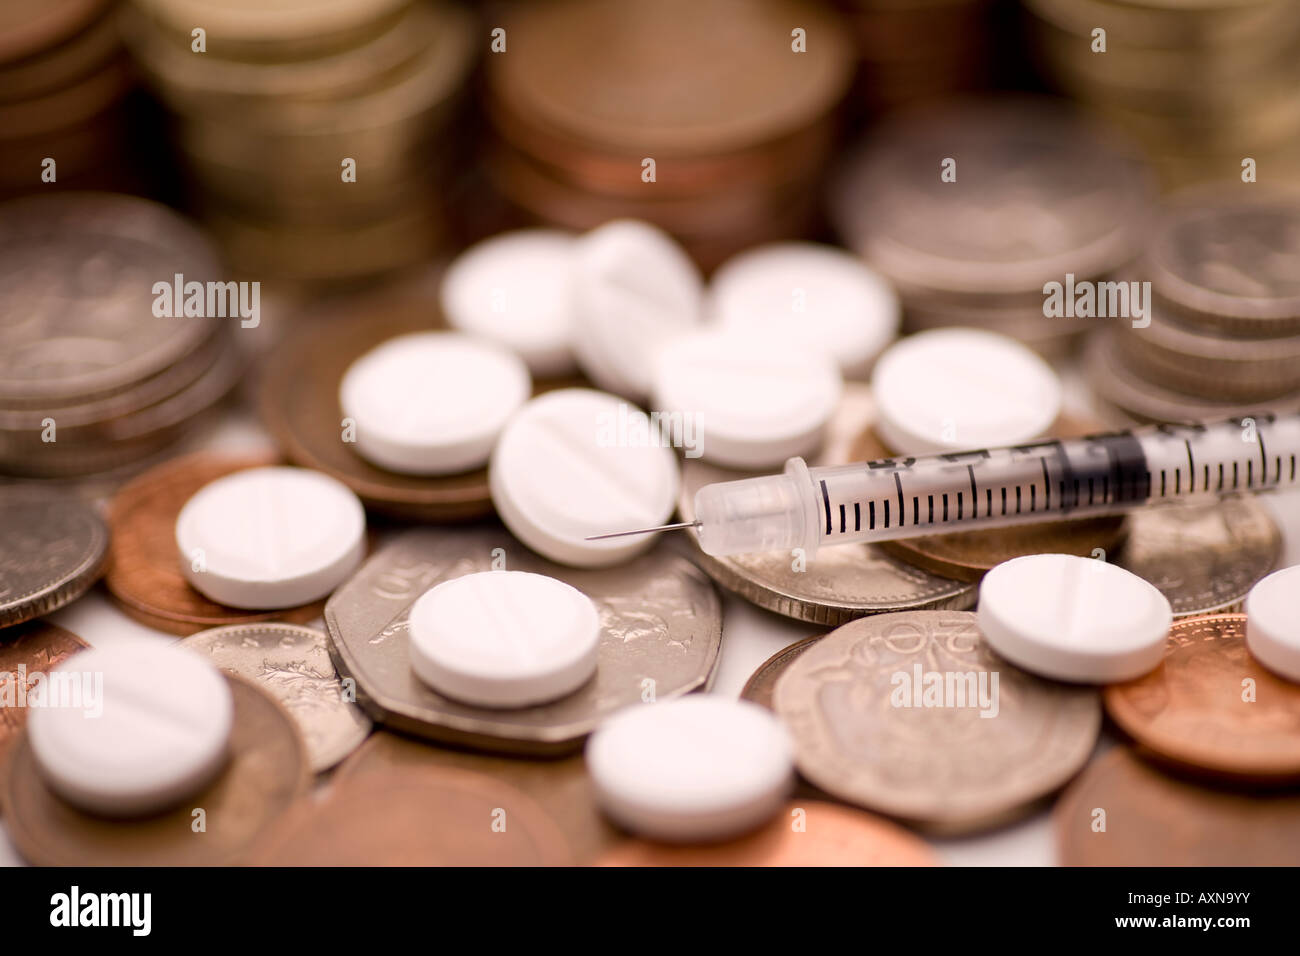 National Health Service nhs healthcare expenses prescription charges cash money drugs and a syringe Stock Photo